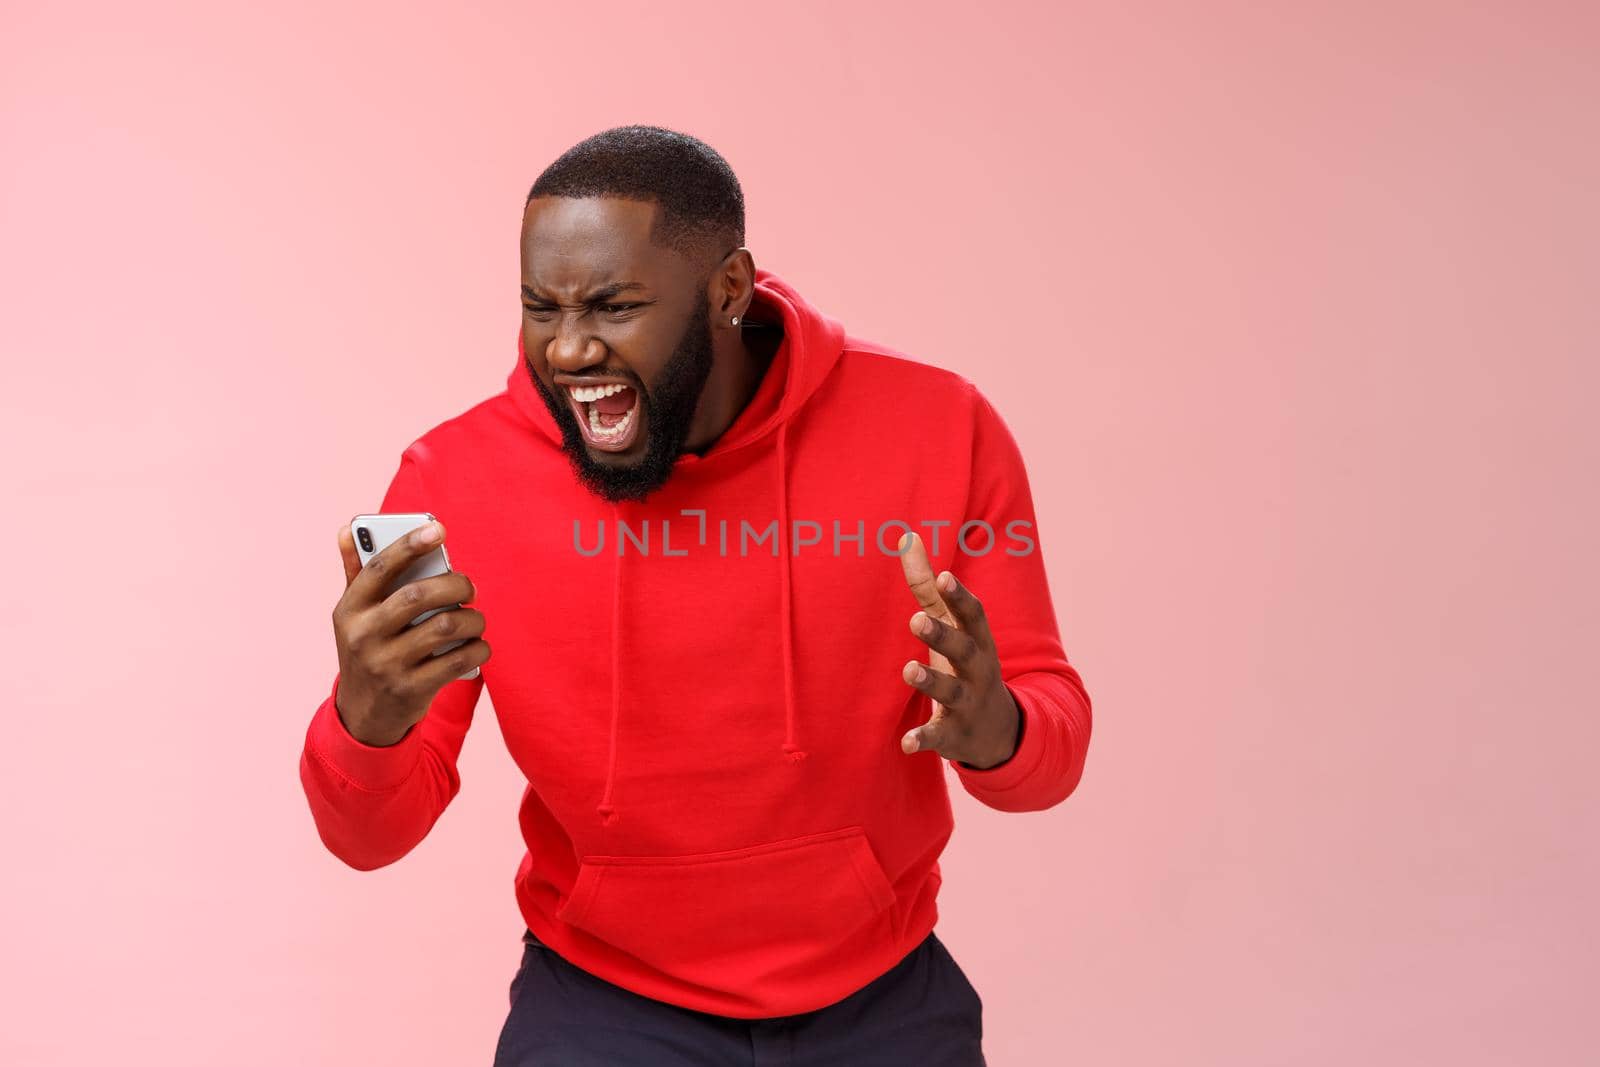 Angry furious african-american bearded guy lose control emotions shouting outraged annoyed smartphone display look phone insane stooping frowning rage, standing irritated pink background.